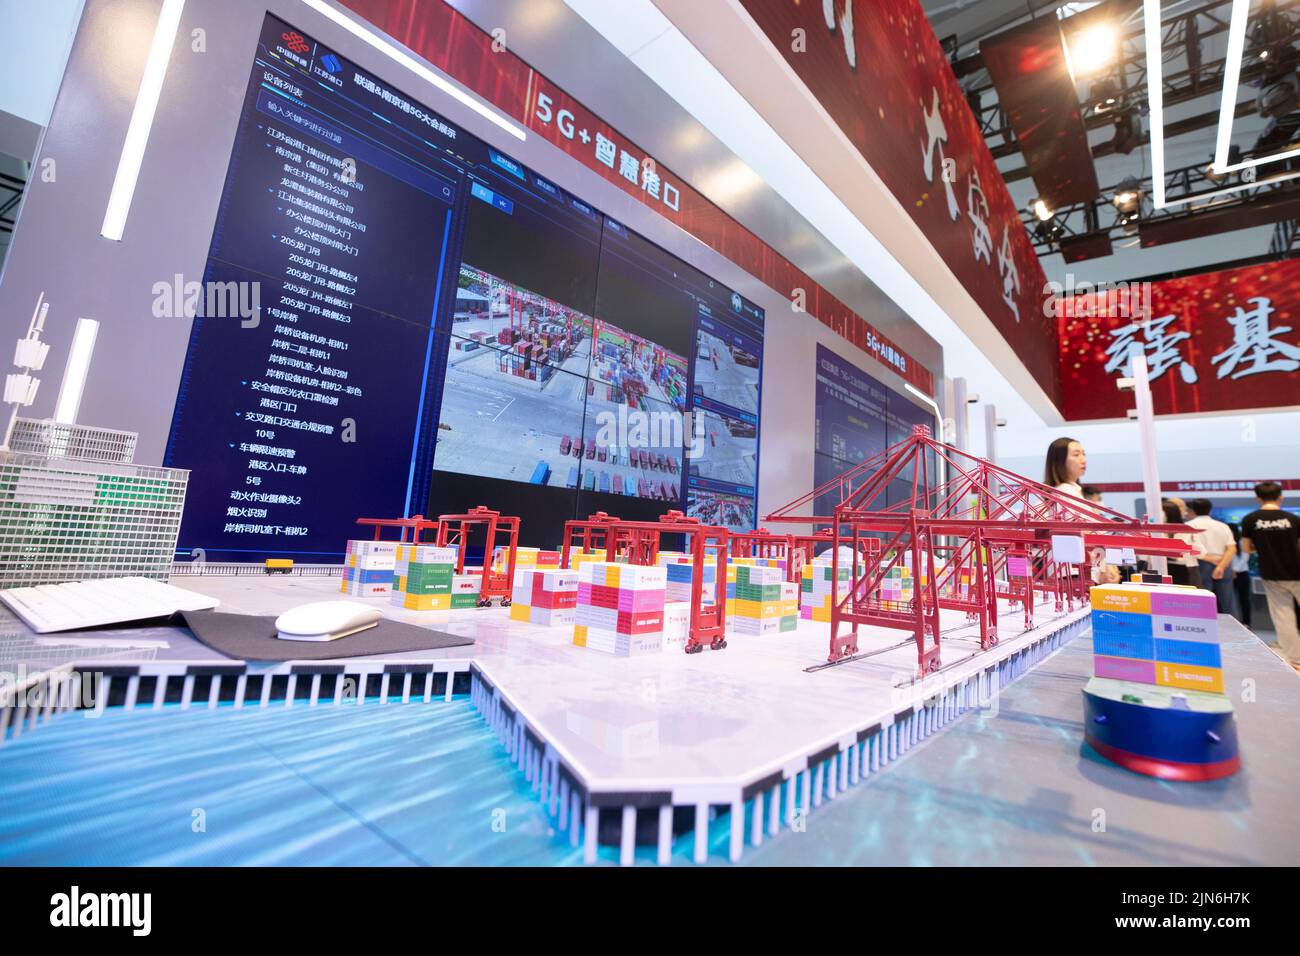 (220809) -- HARBIN, Aug. 9, 2022 (Xinhua) -- Photo taken on Aug. 9, 2022 shows an exhibition area for 5G+ smart port during a media preview of the 2022 World 5G Convention in Harbin, capital of northeast China's Heilongjiang Province. The 2022 World 5G Convention will be held here from August 10 to 12. (Xinhua/Zhang Tao) Stock Photo